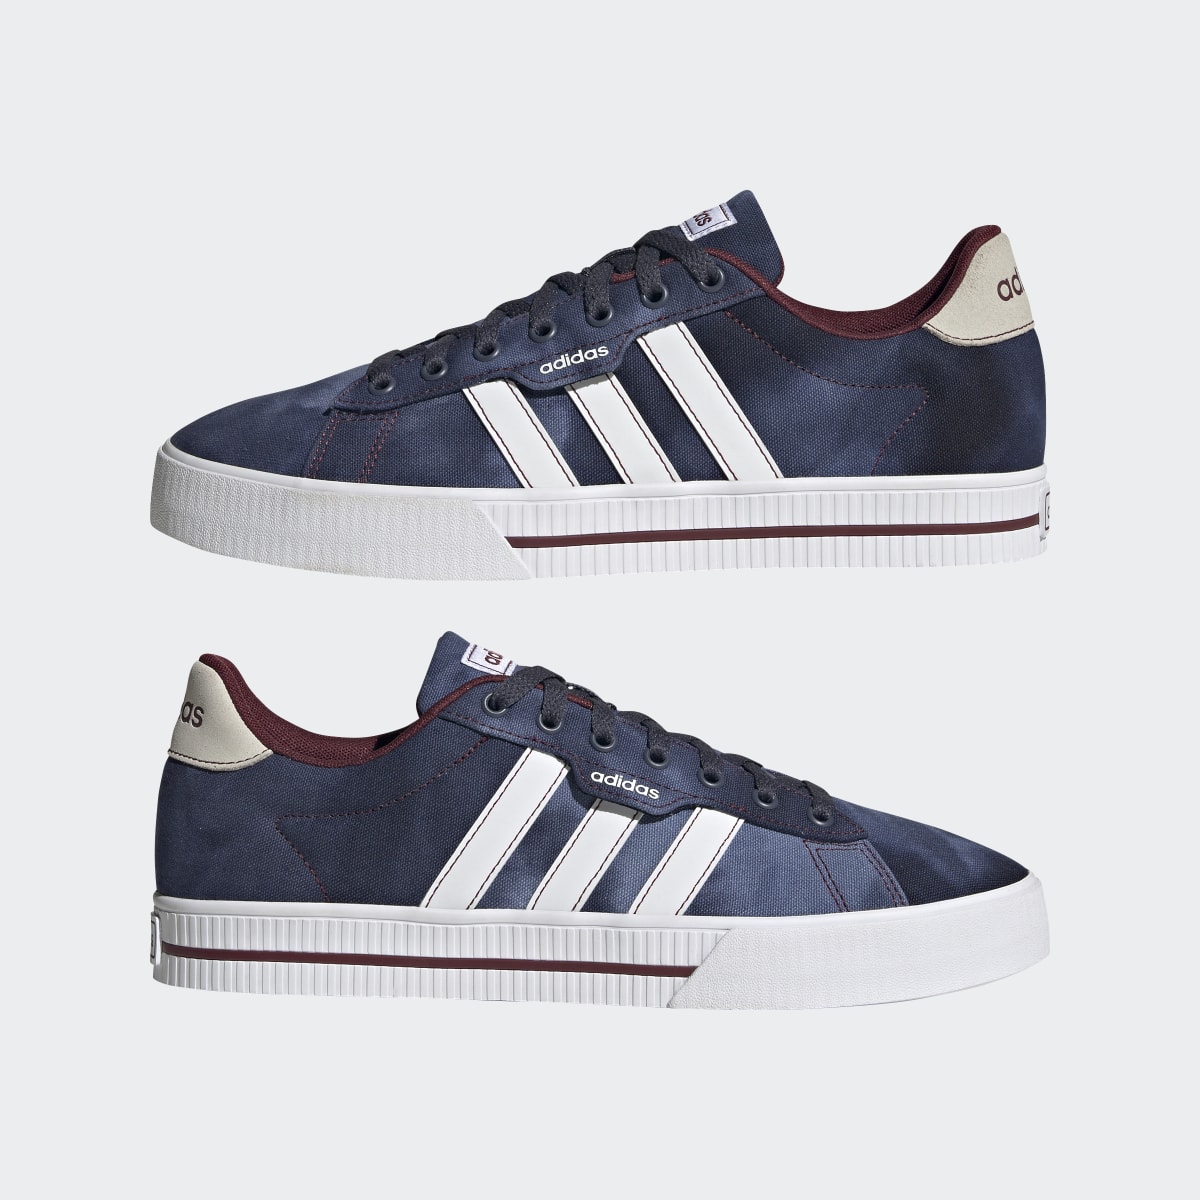 Adidas Daily 3.0 Lifestyle Skateboarding Suede Shoes. 8